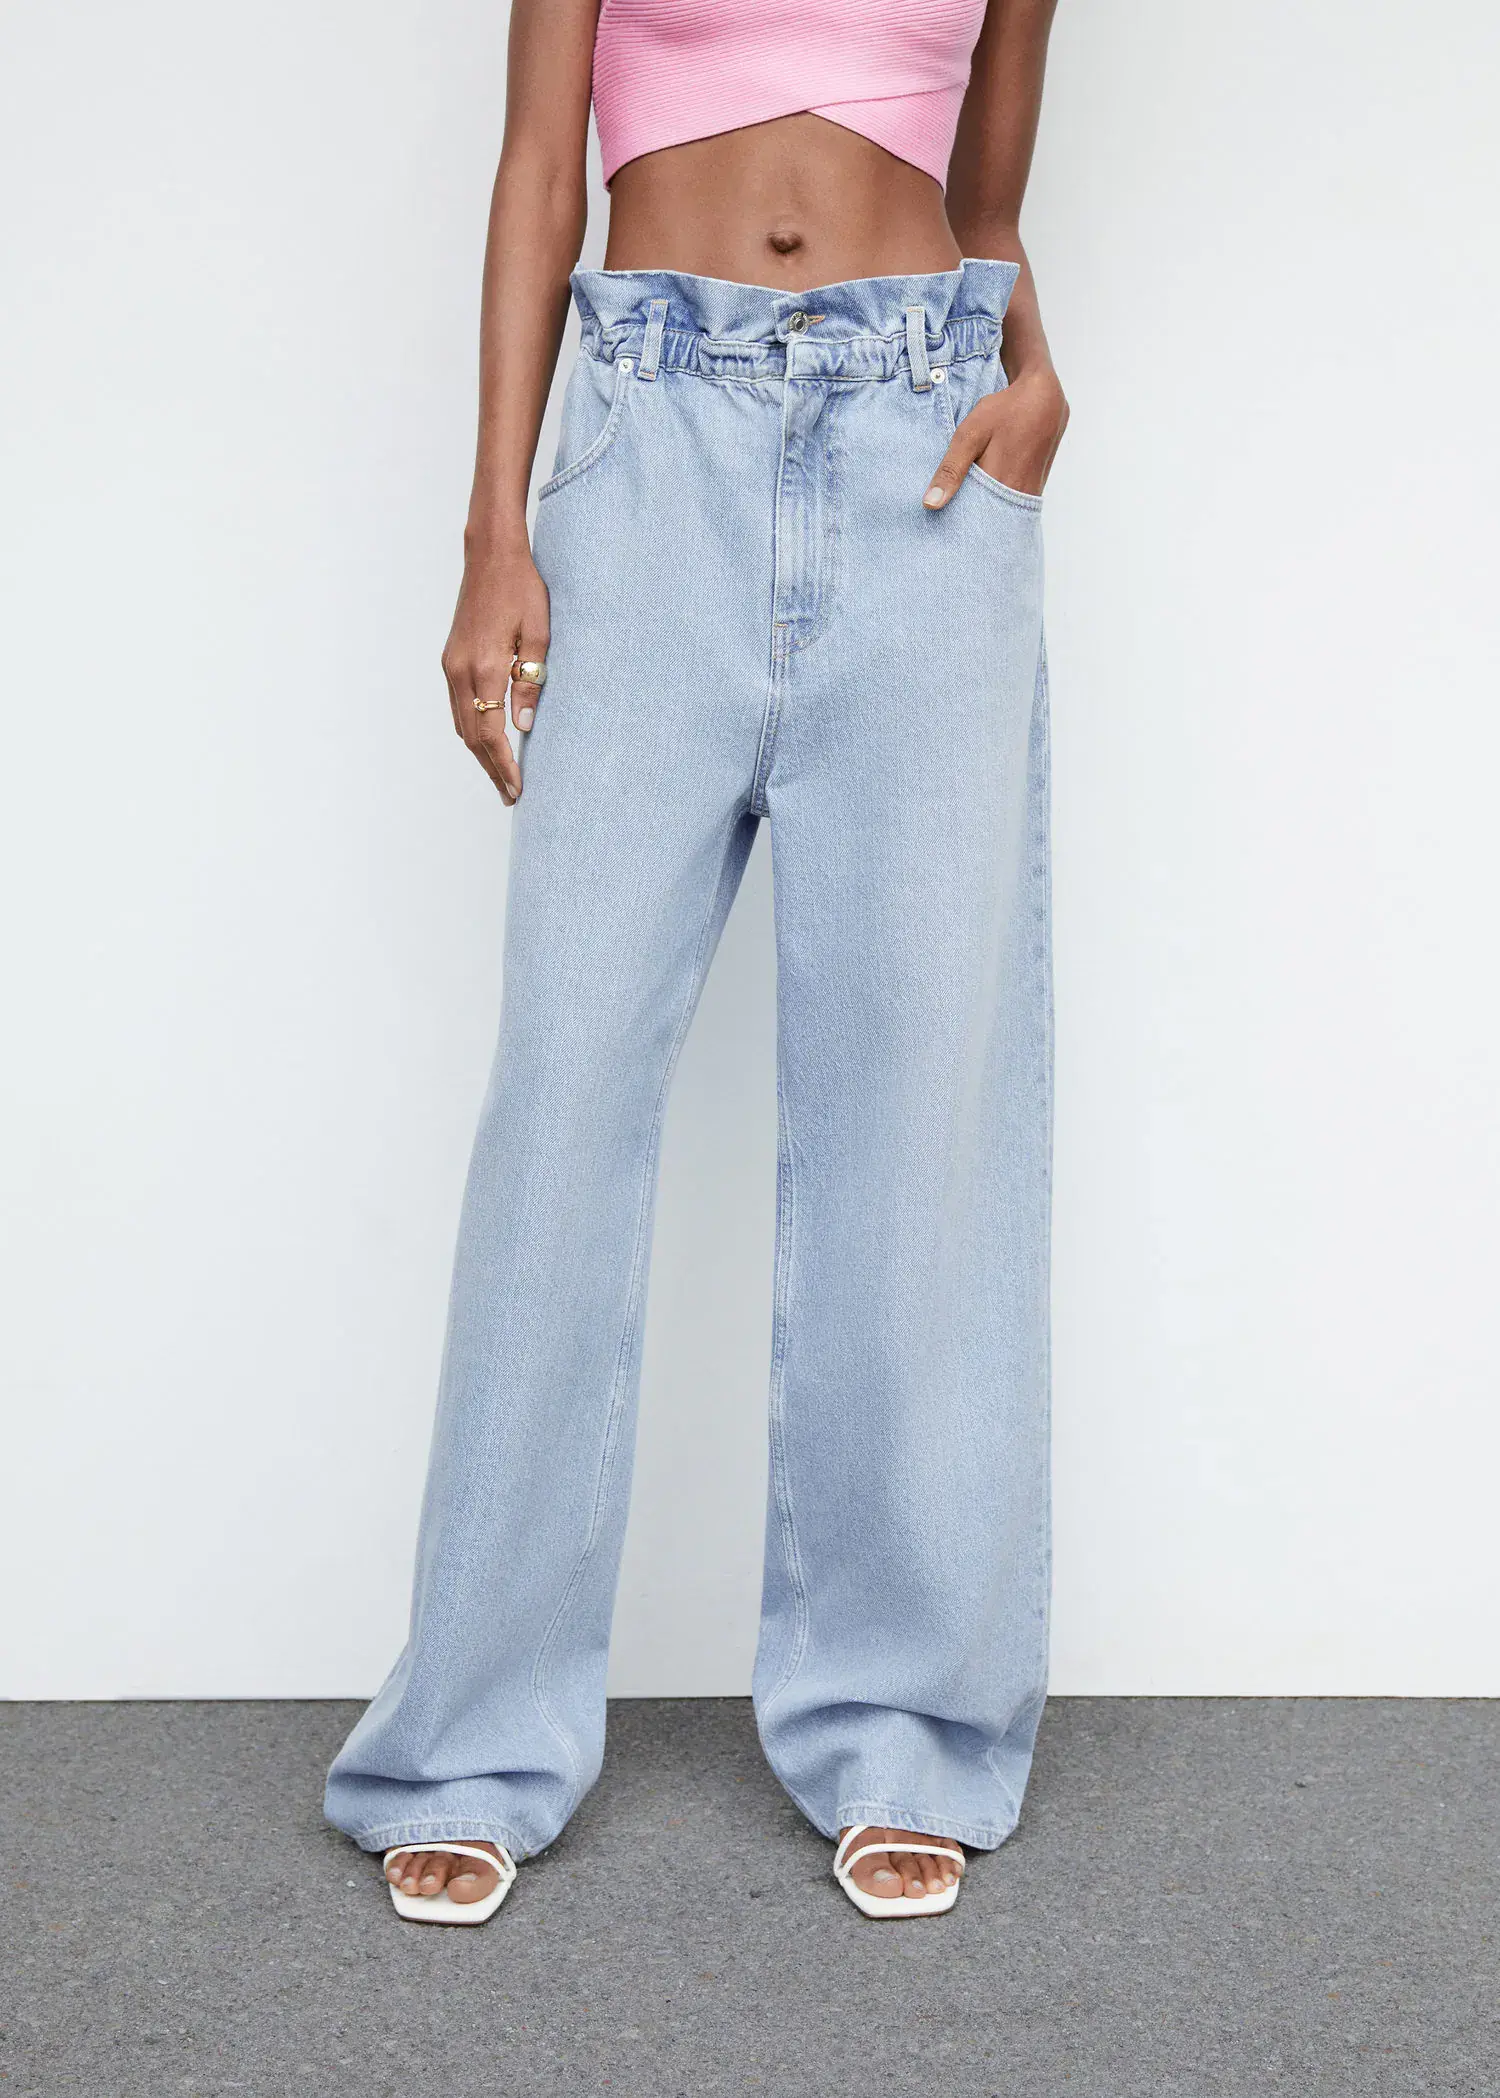 Mango Waist straight Slouchy jeans. a person standing in front of a white wall. 